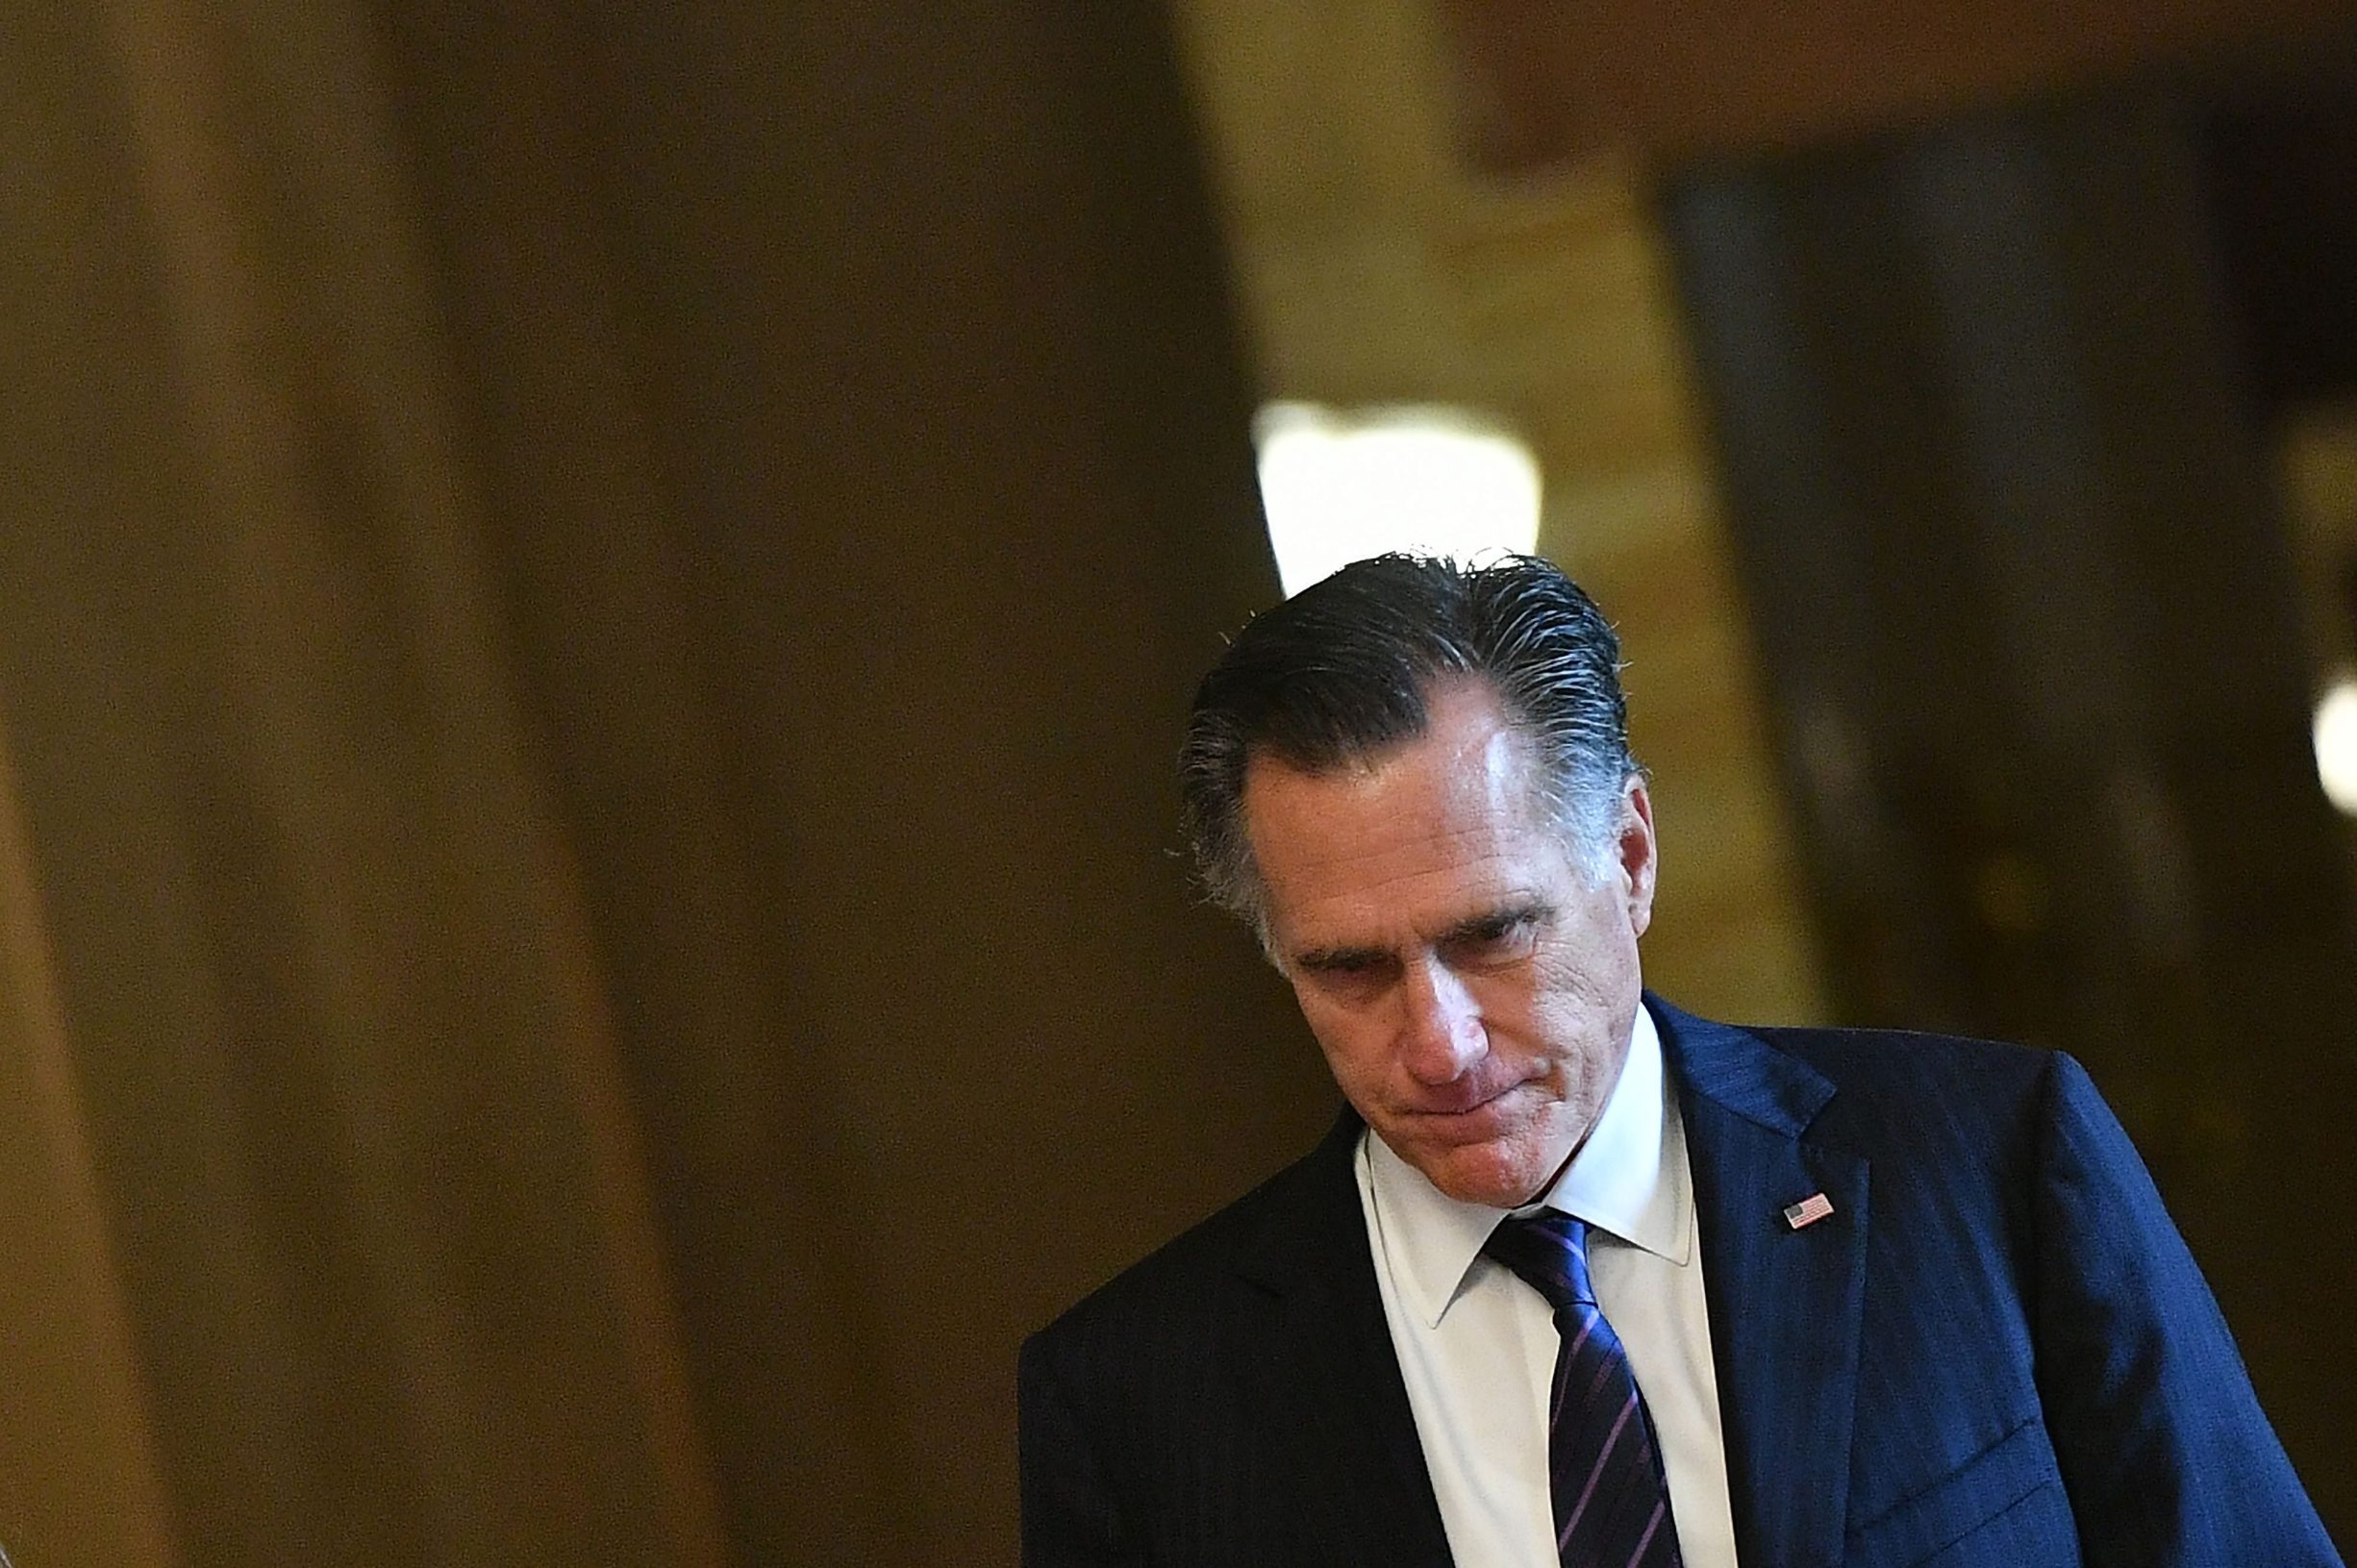 US Senator Mitt Romney (R-UT) returns from a recess during the impeachment trial proceedings of US President Donald Trump on Capitol Hill January 30, 2020, in Washington, DC. - The fight over calling witnesses to testify in President Donald Trump's impeachment trial intensified January 28, 2020 after Trump's lawyers closed their defense calling the abuse of power charges against him politically motivated. Democrats sought to have the Senate subpoena former White House national security advisor John Bolton to provide evidence after leaks from his forthcoming book suggested he could supply damning evidence against Trump.
. (Photo by Mandel NGAN / AFP)